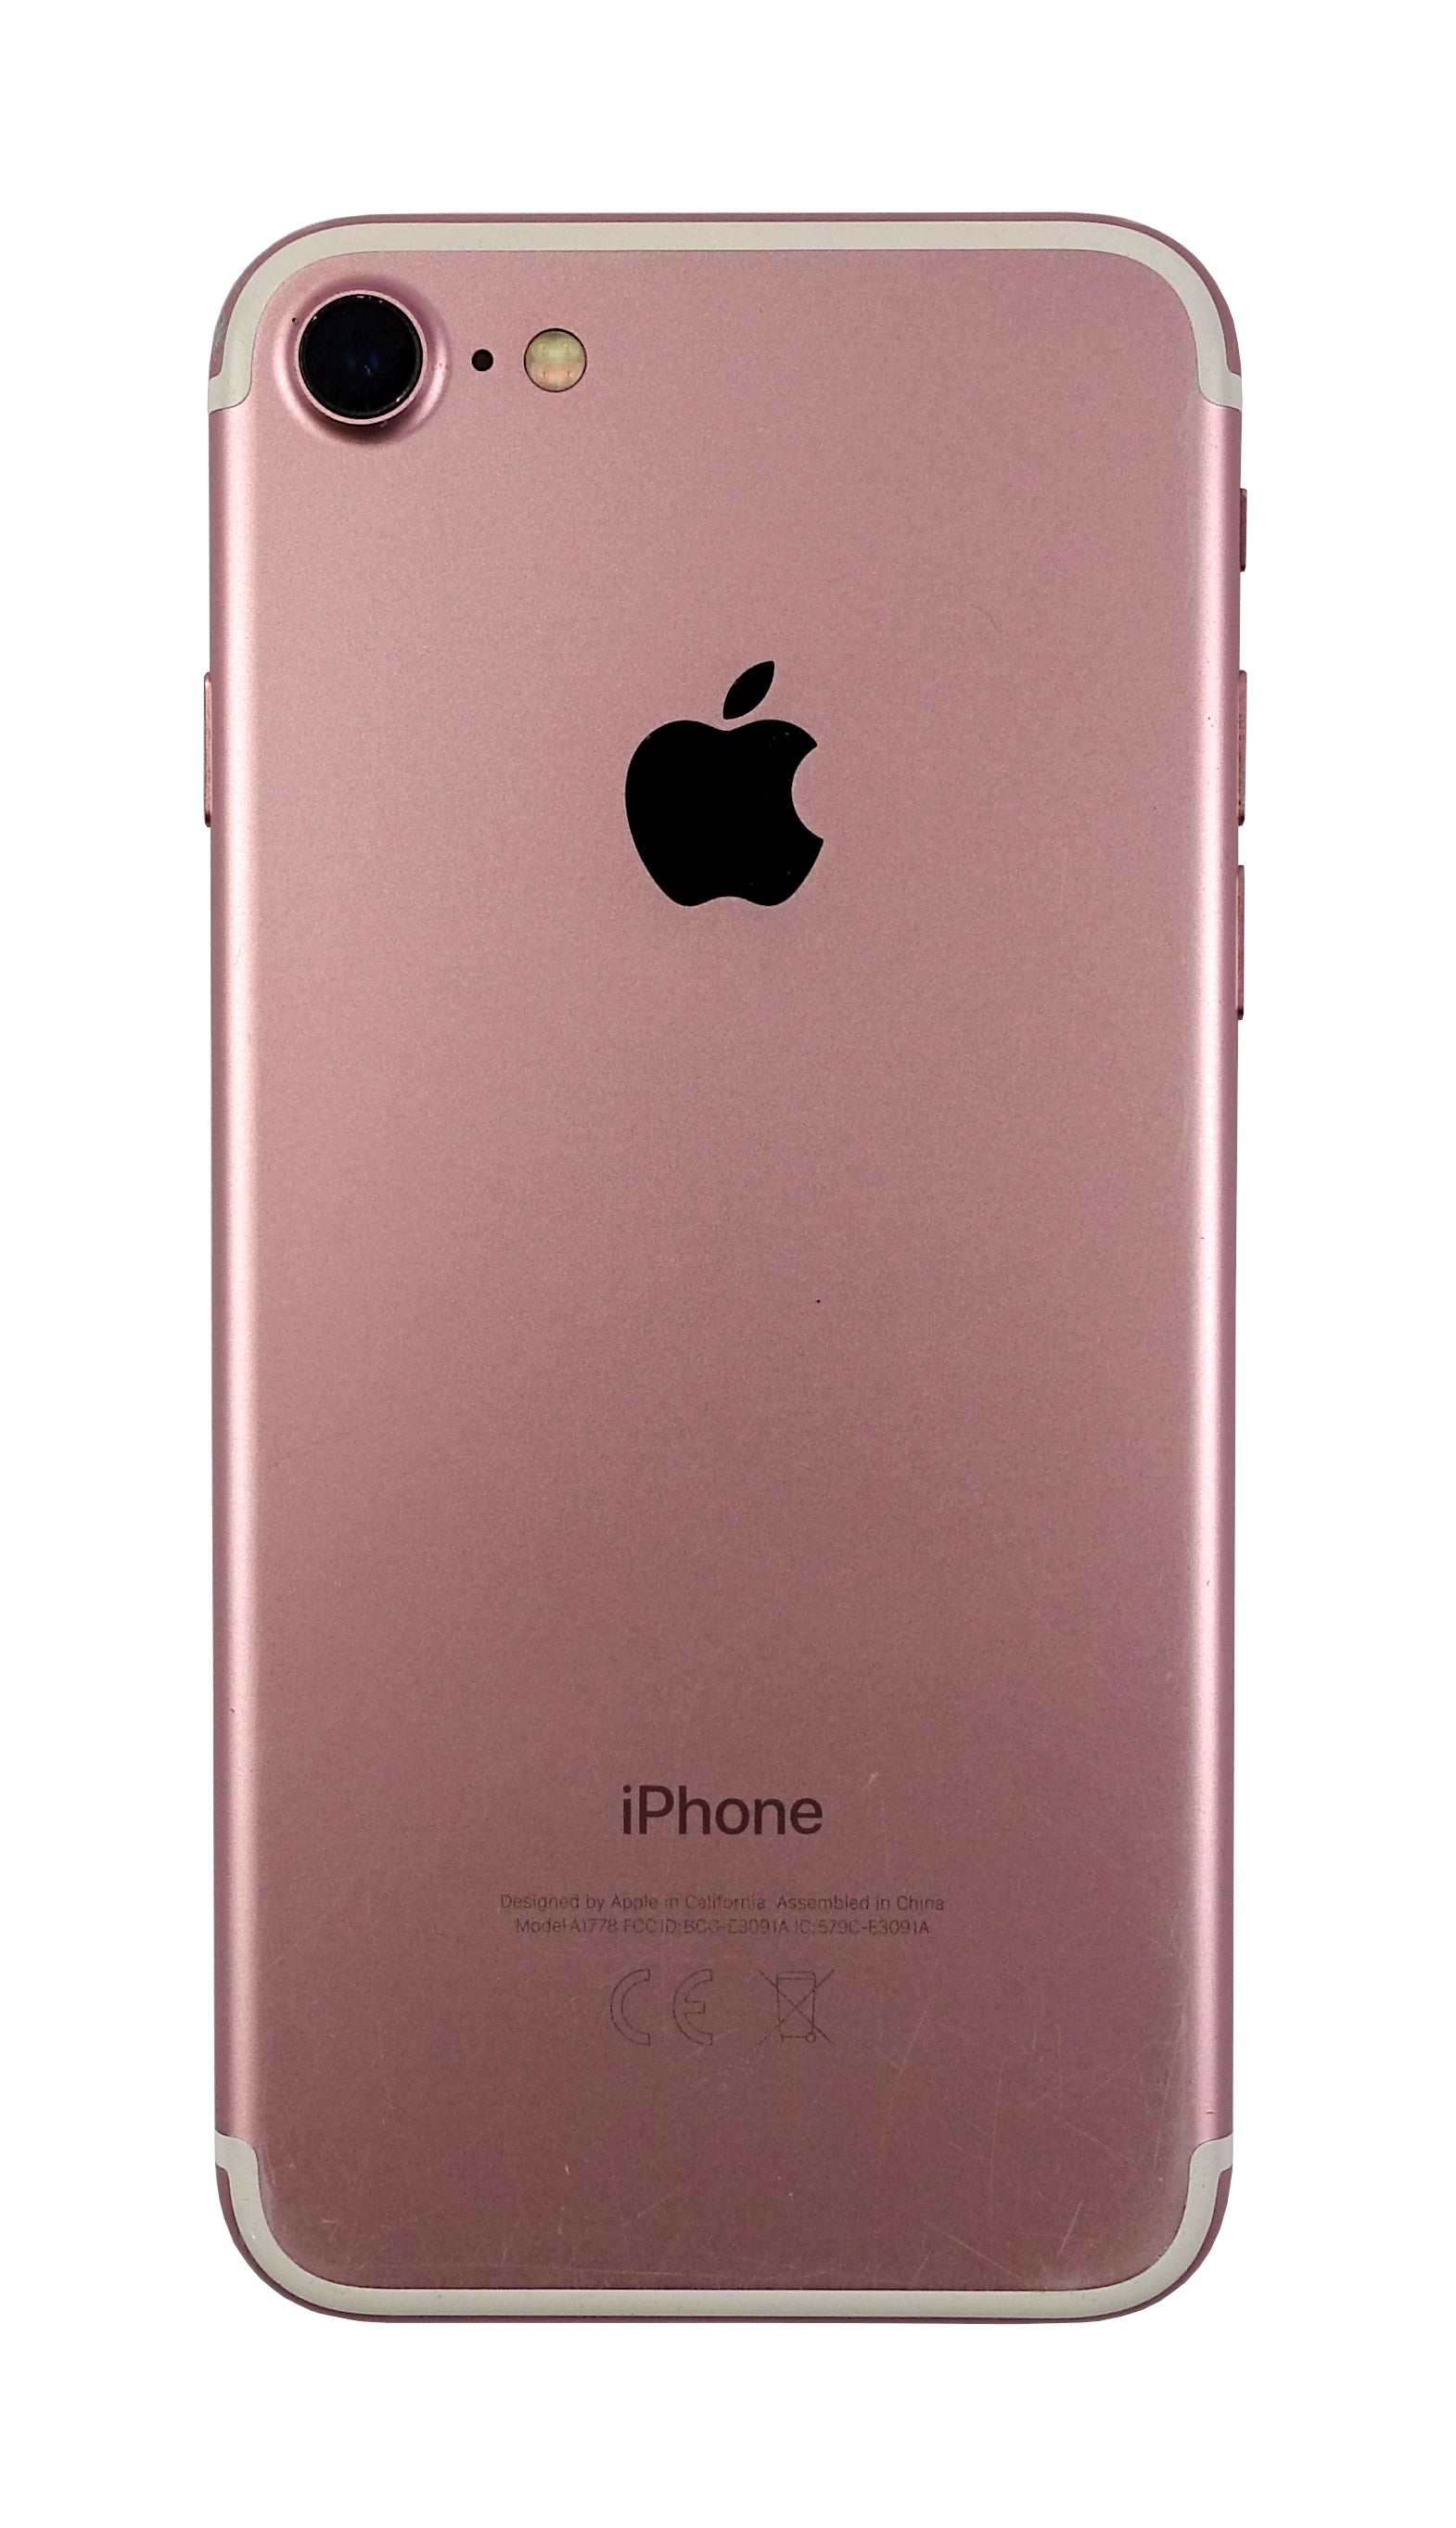 Apple iPhone 7 Smartphone, 32GB, Network Unlocked, Rose Gold, A1778